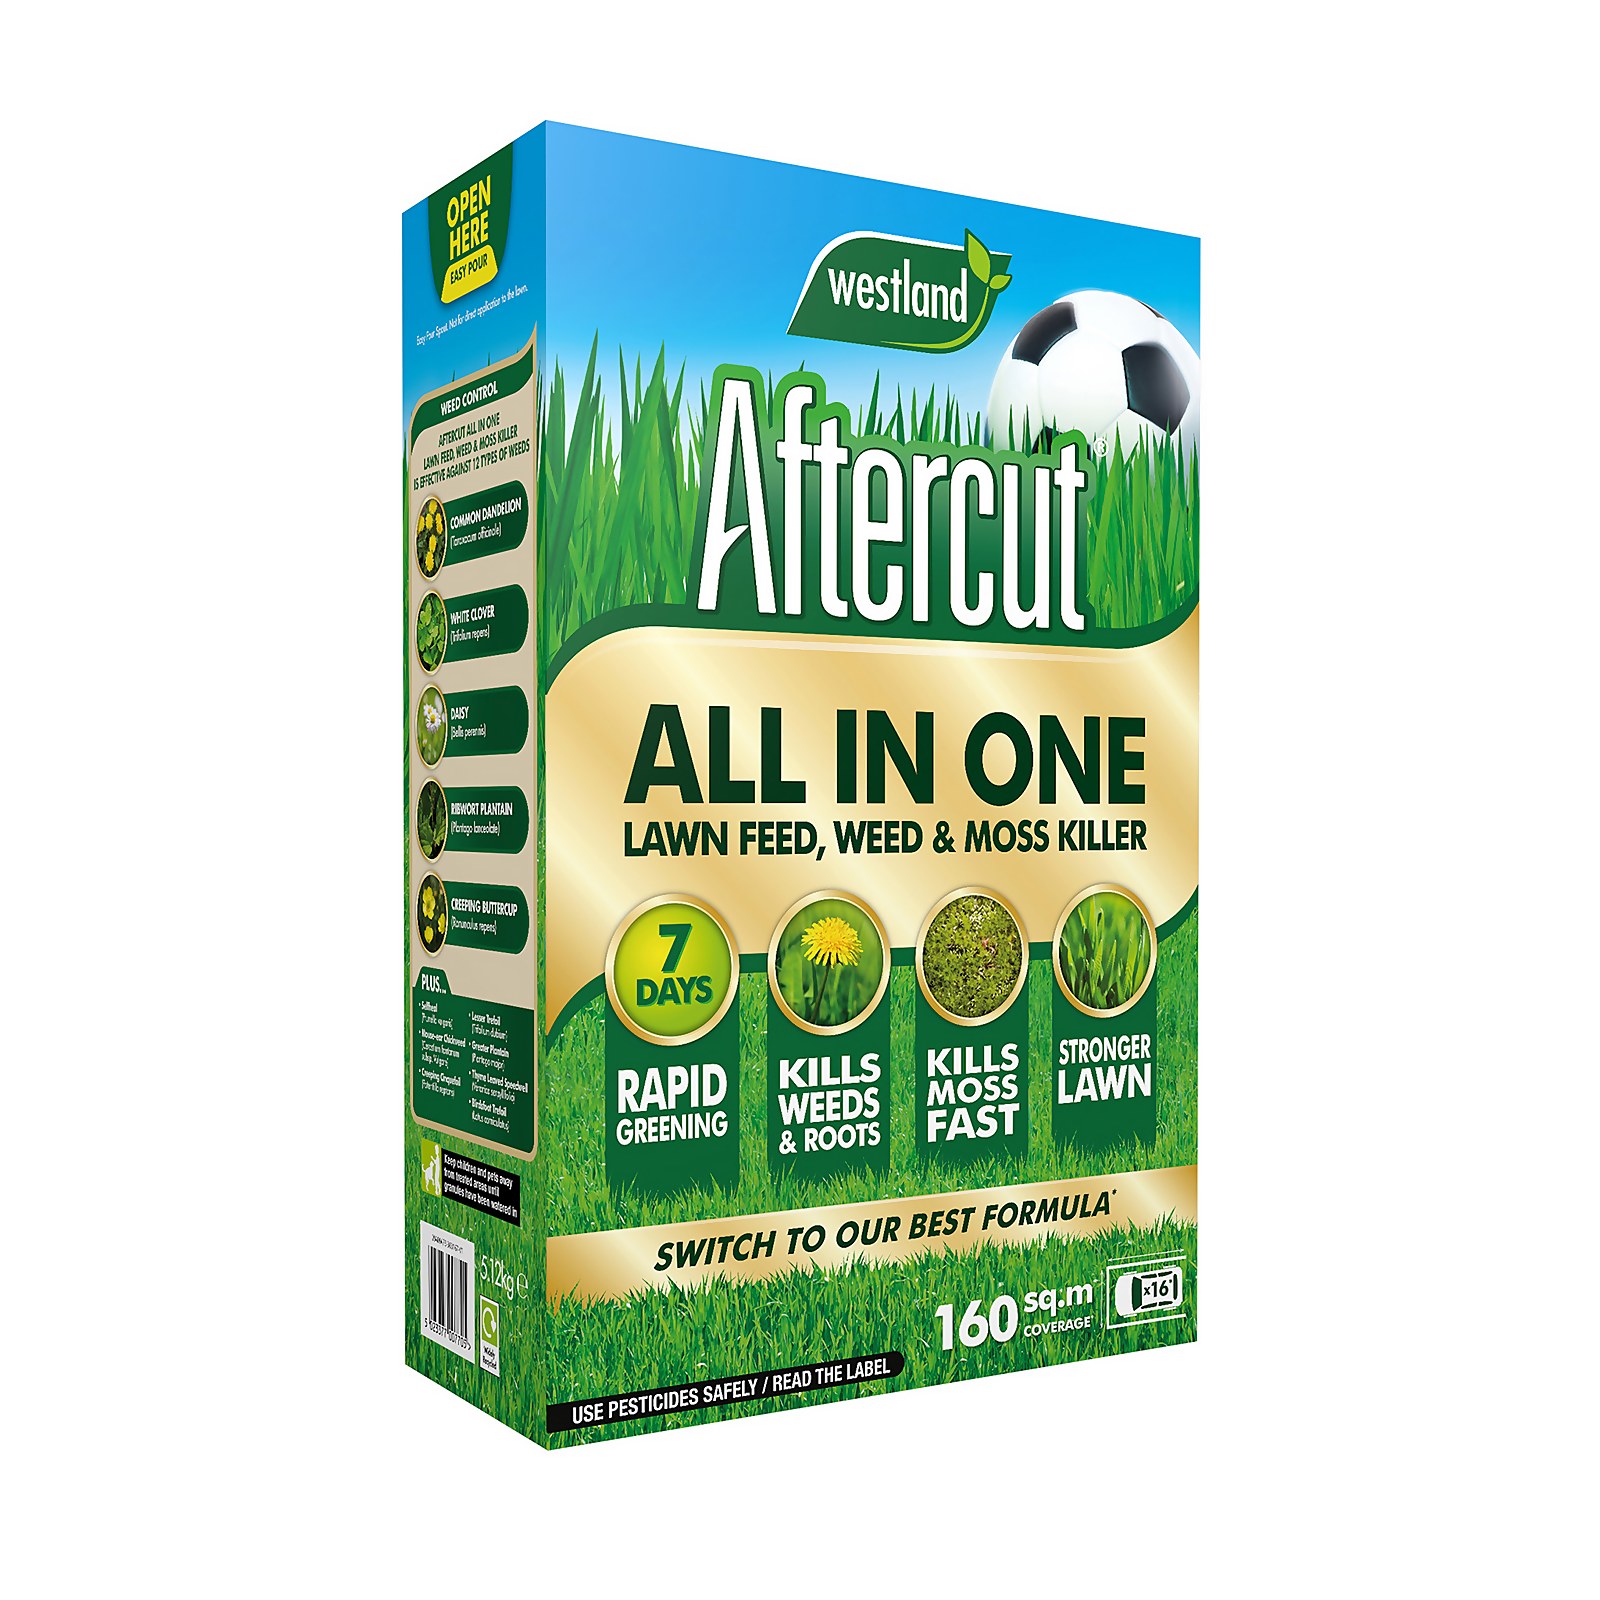 Aftercut All In One Lawn Feed, Weed & Moss Killer 160m2 Box